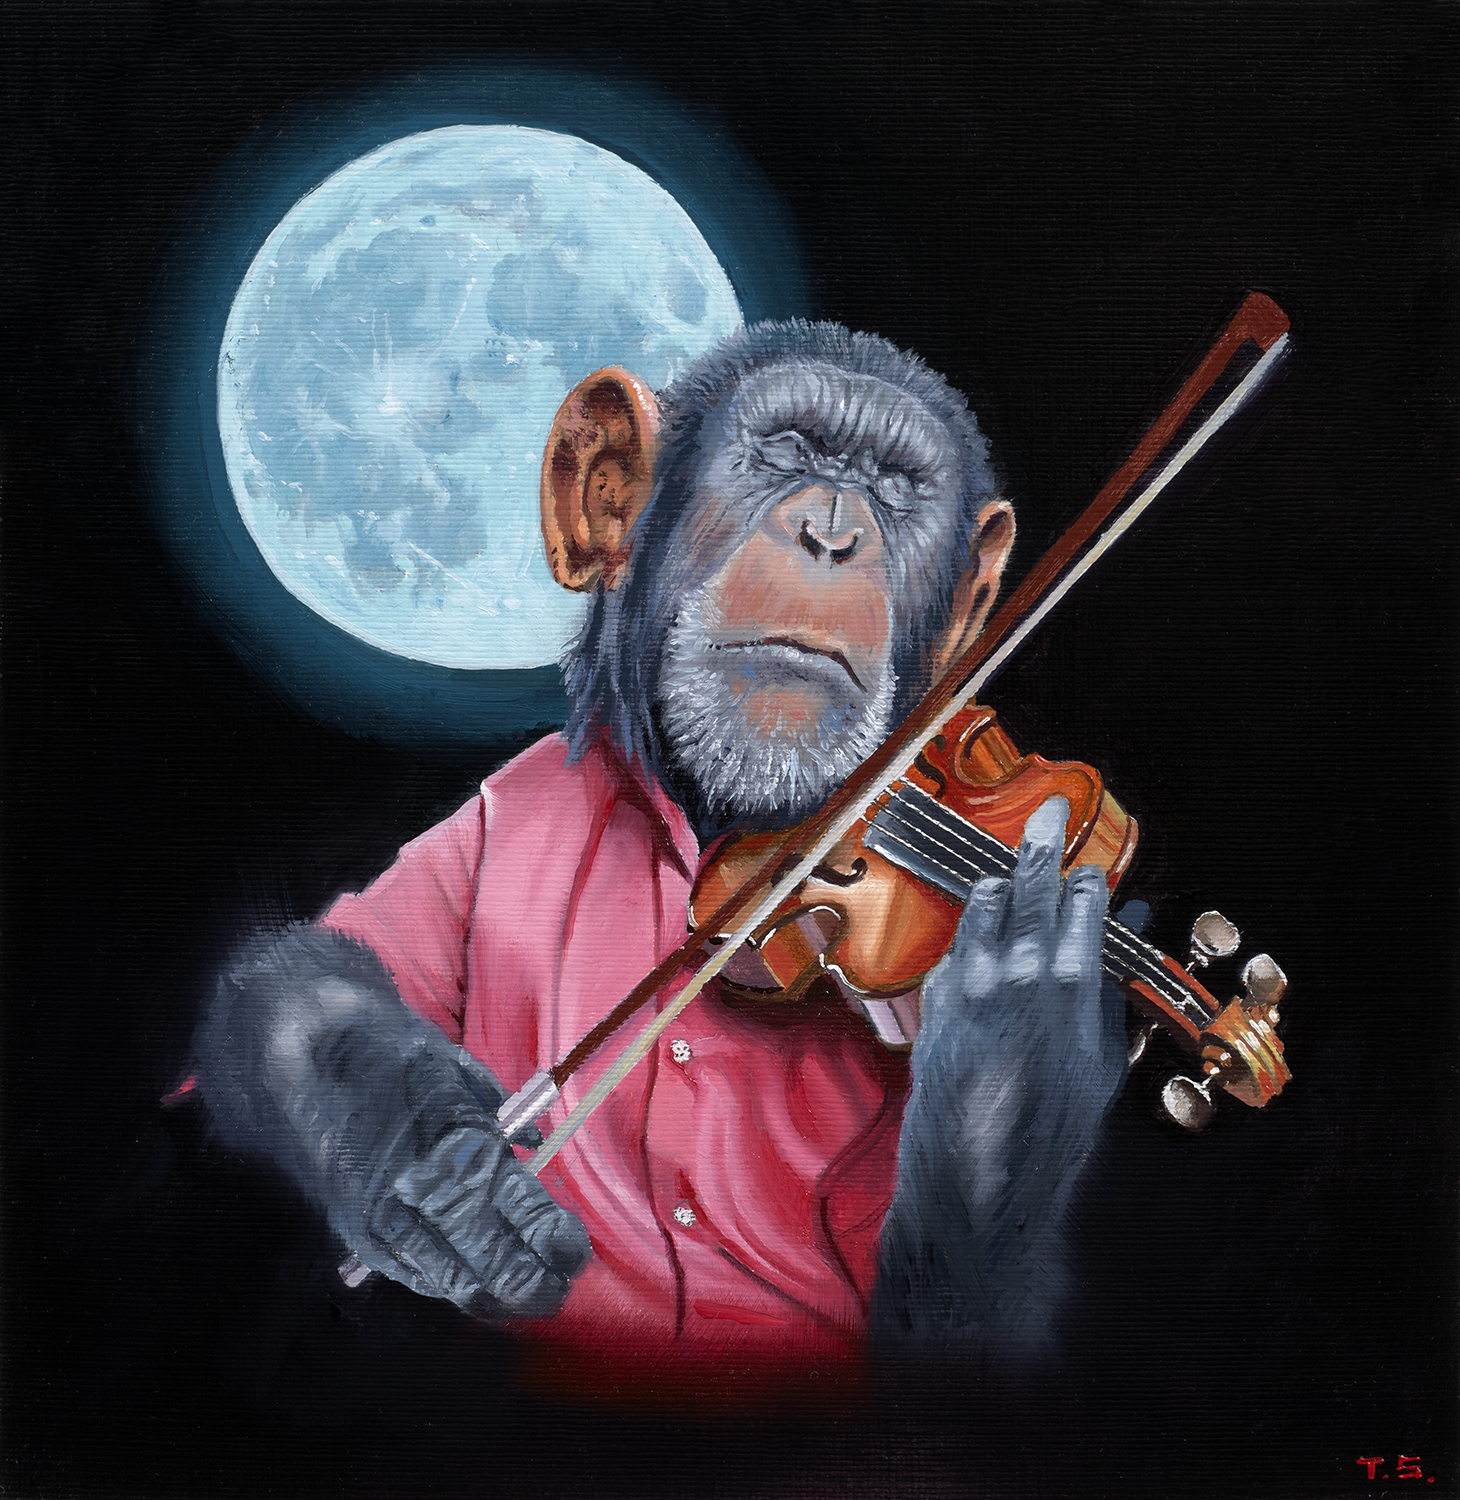 A chimp / gorilla hybrid playing a violin with the moon behind him - Tony South - Ad Astra